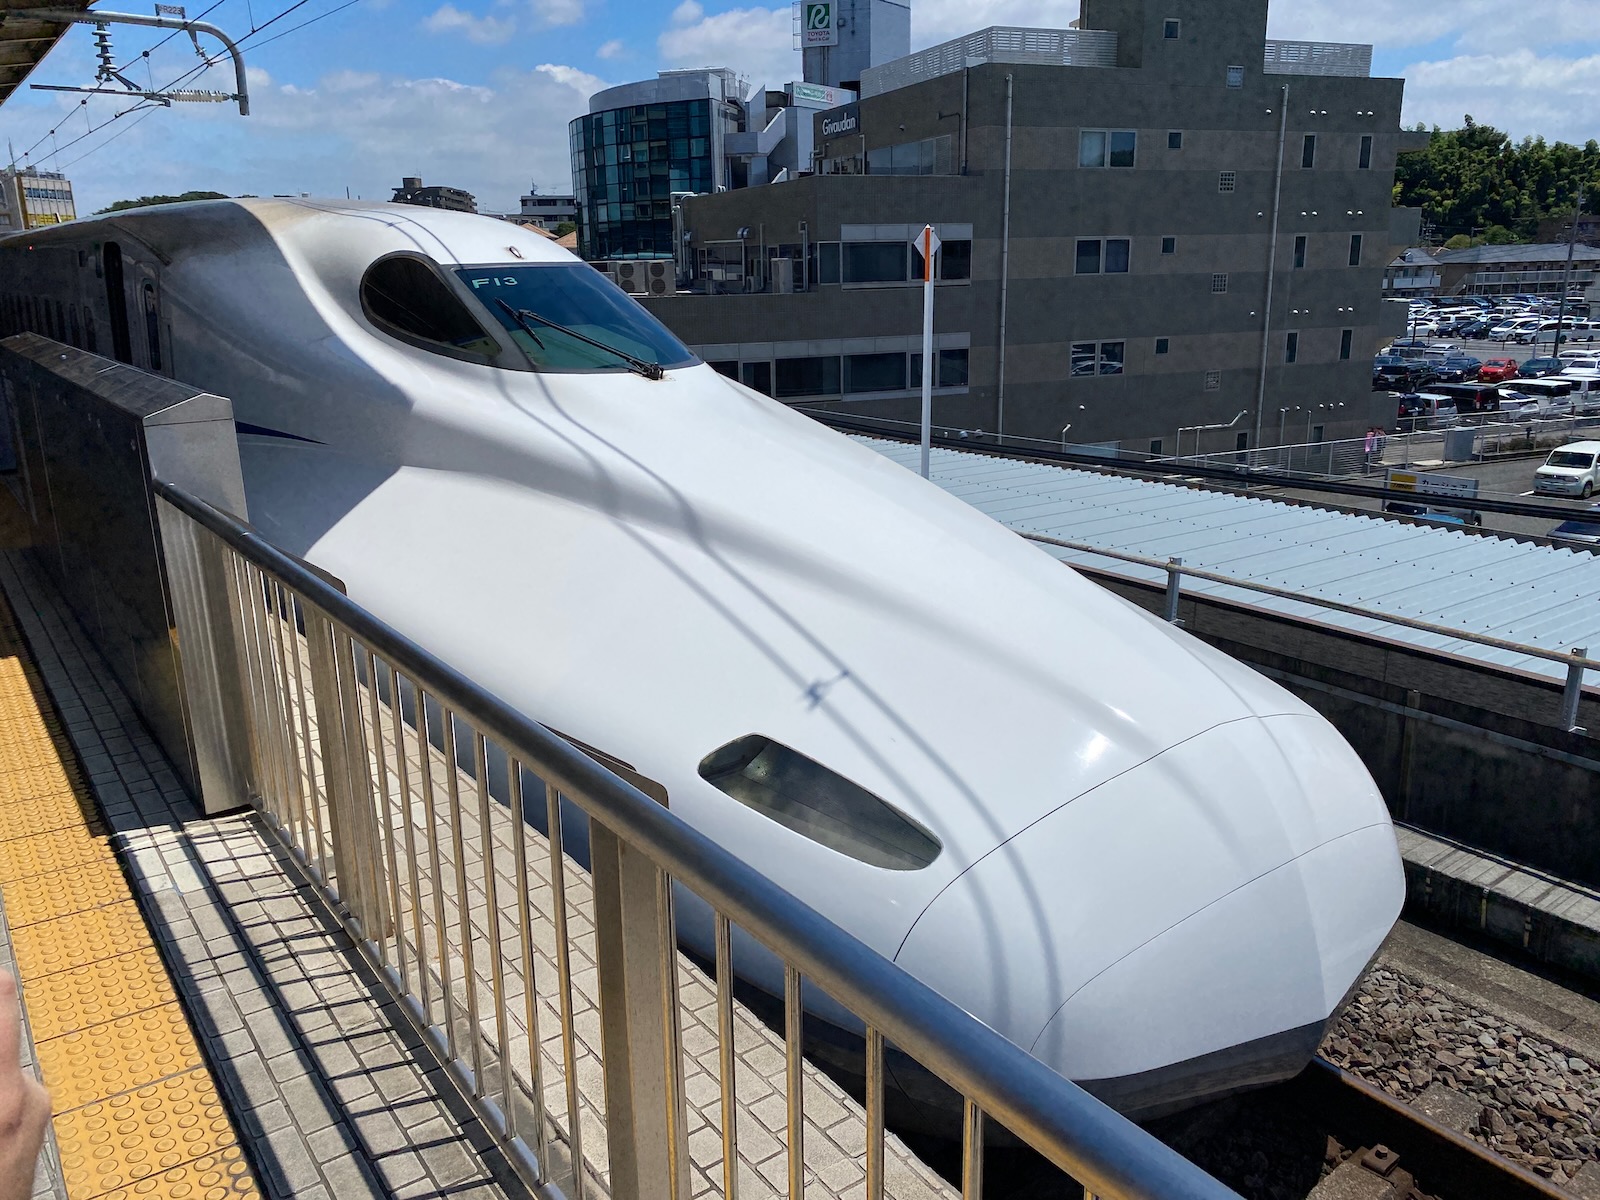 Elongated nose of a Shinkansen train pulling into the station.